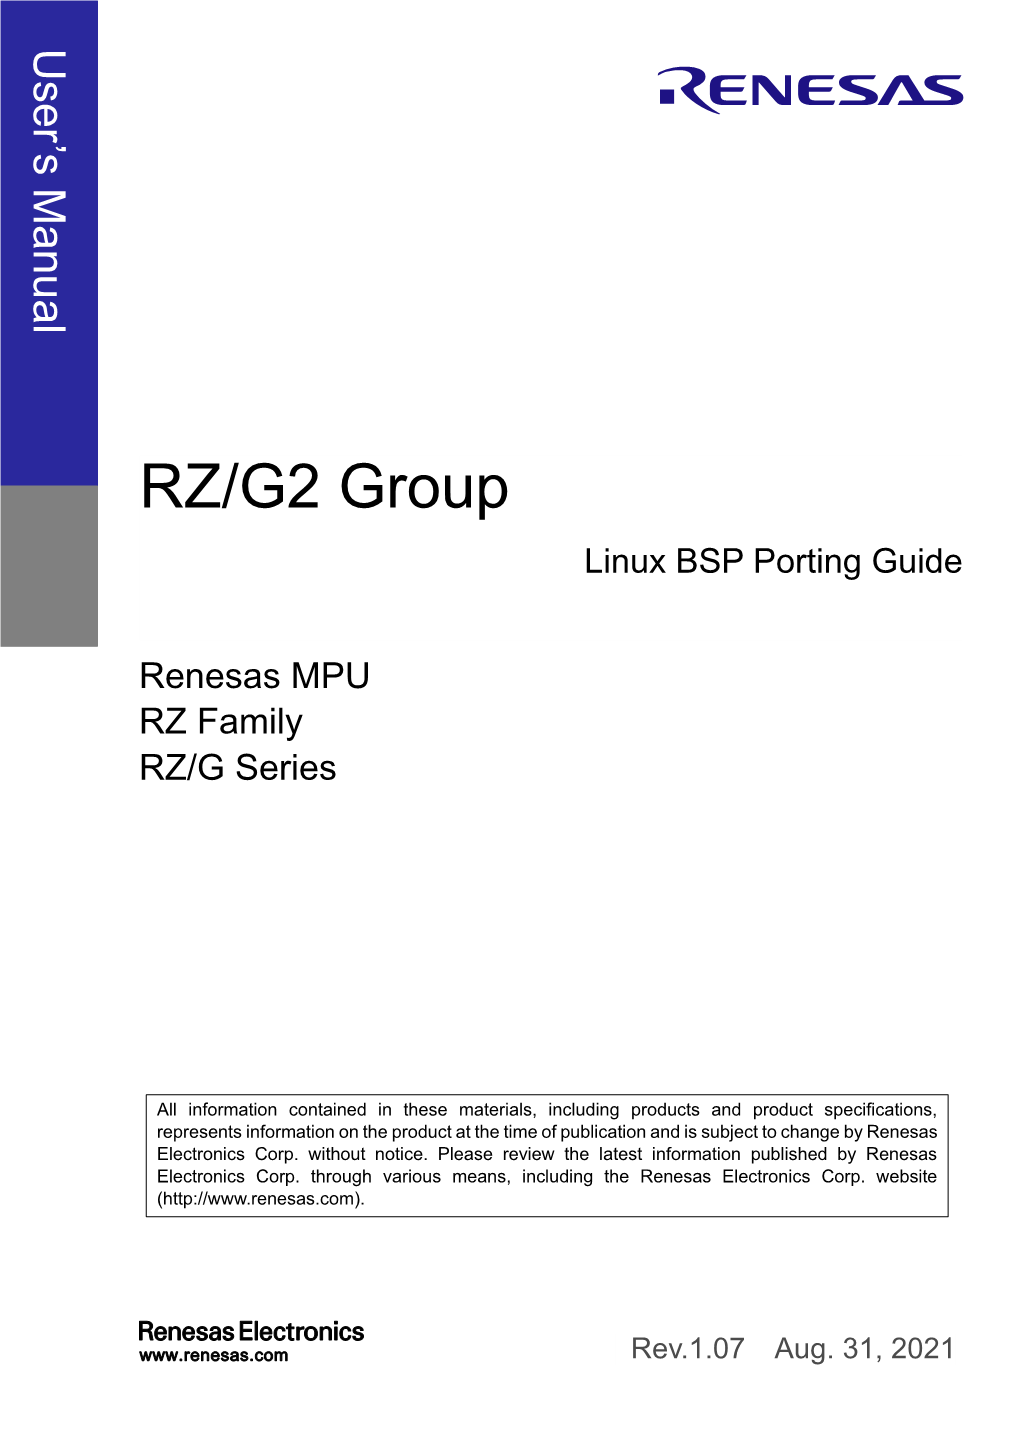 RZ/G2 Group Linux BSP Porting Guide